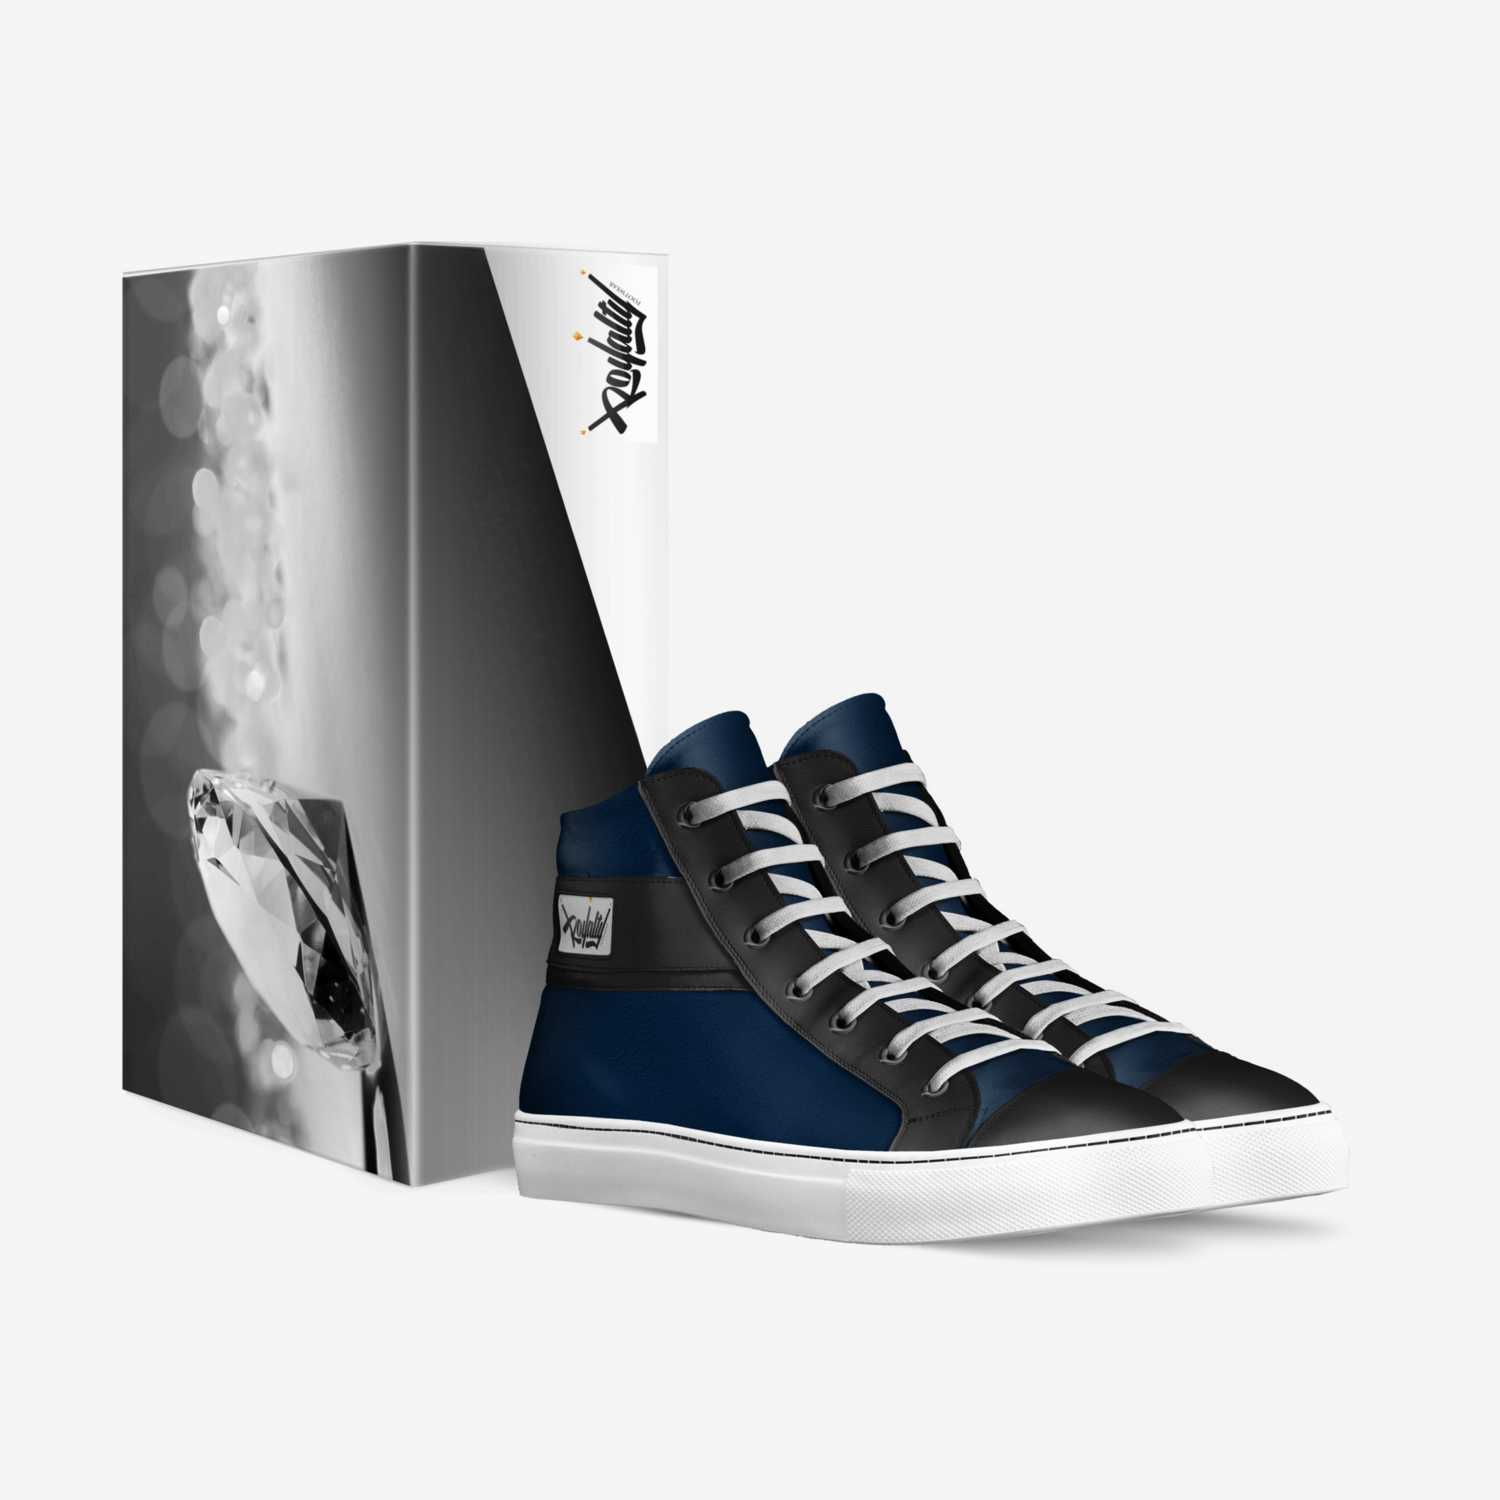 Royalty Footwear custom made in Italy shoes by Anton Mcarthur | Box view